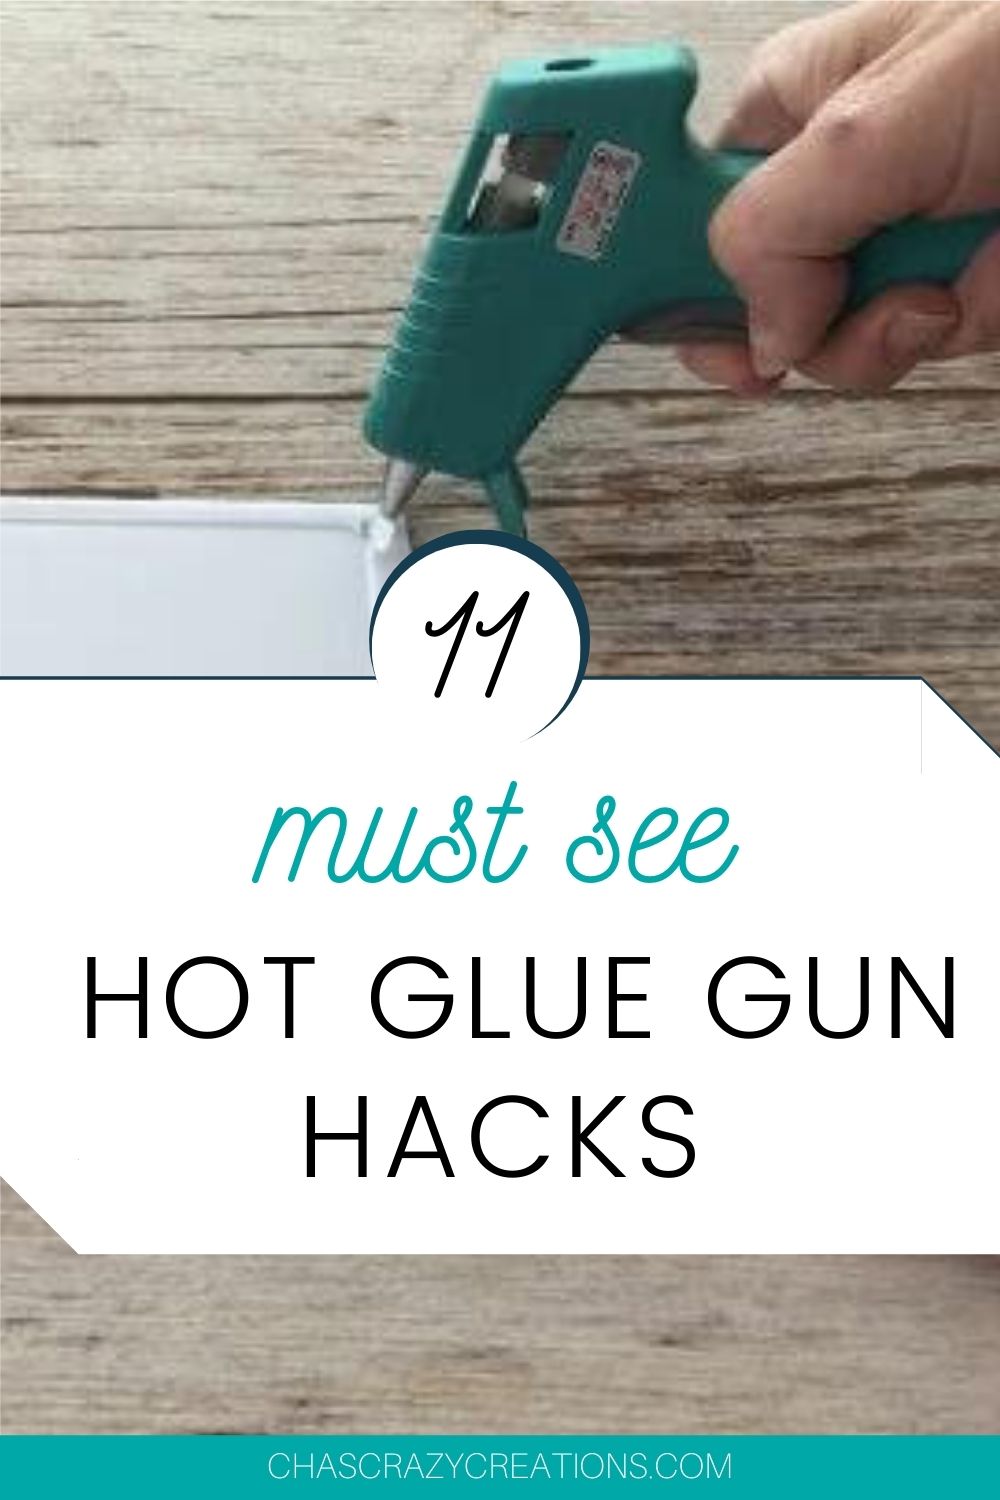 must see hot glue gun hacks pin image with text overlay